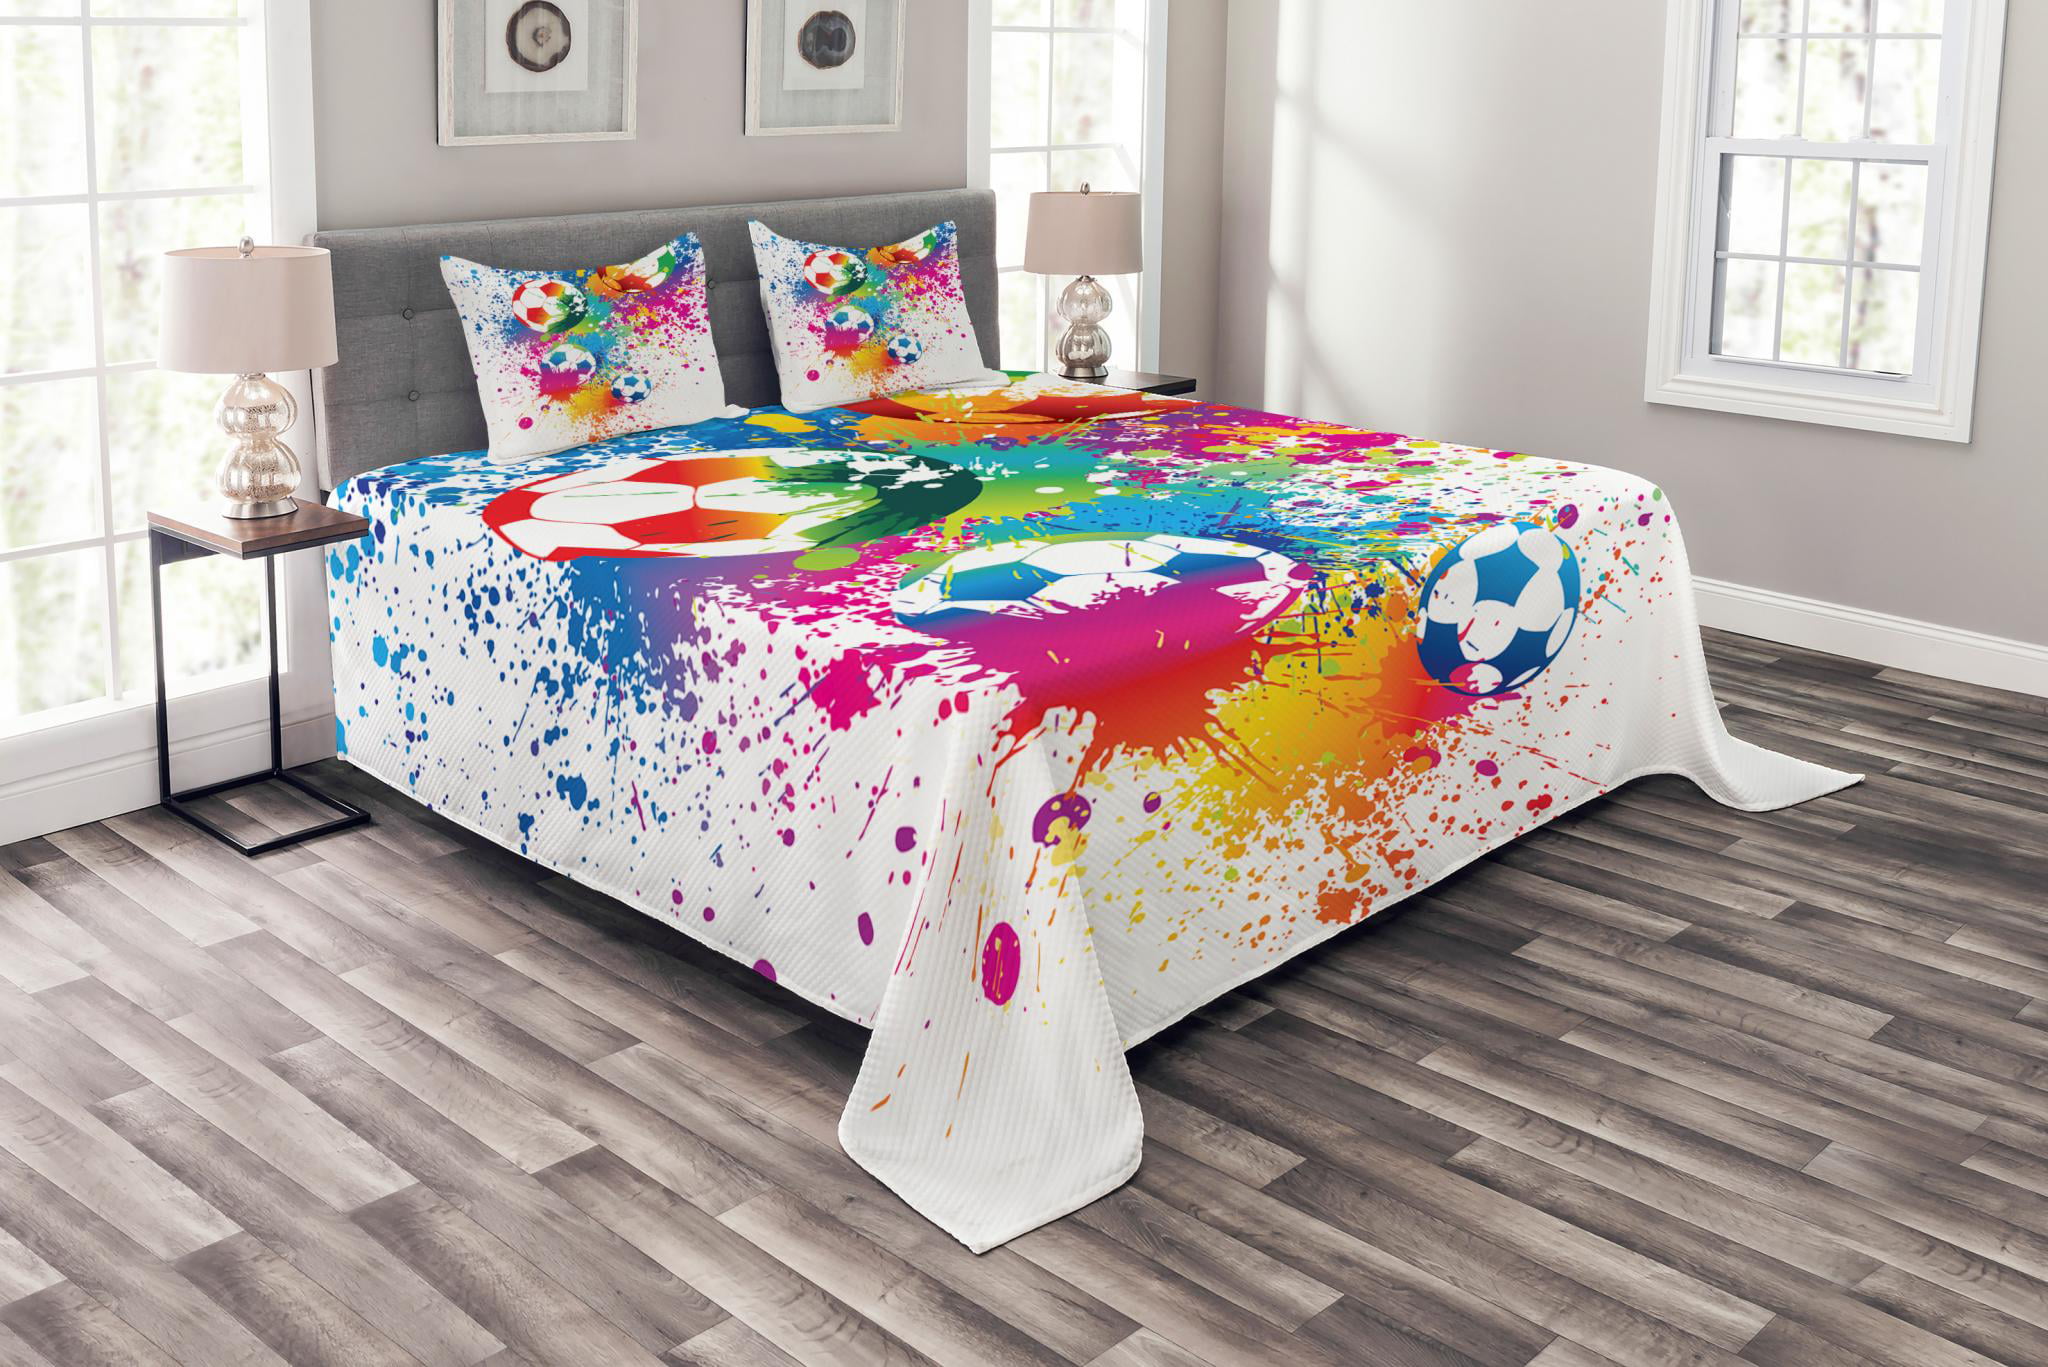 Soccer Bedspread Set King Size, Colored Splashes All over Soccer Balls  Score World Cup Championship Athletic Artful, Quilted 3 Piece Decor  Coverlet 